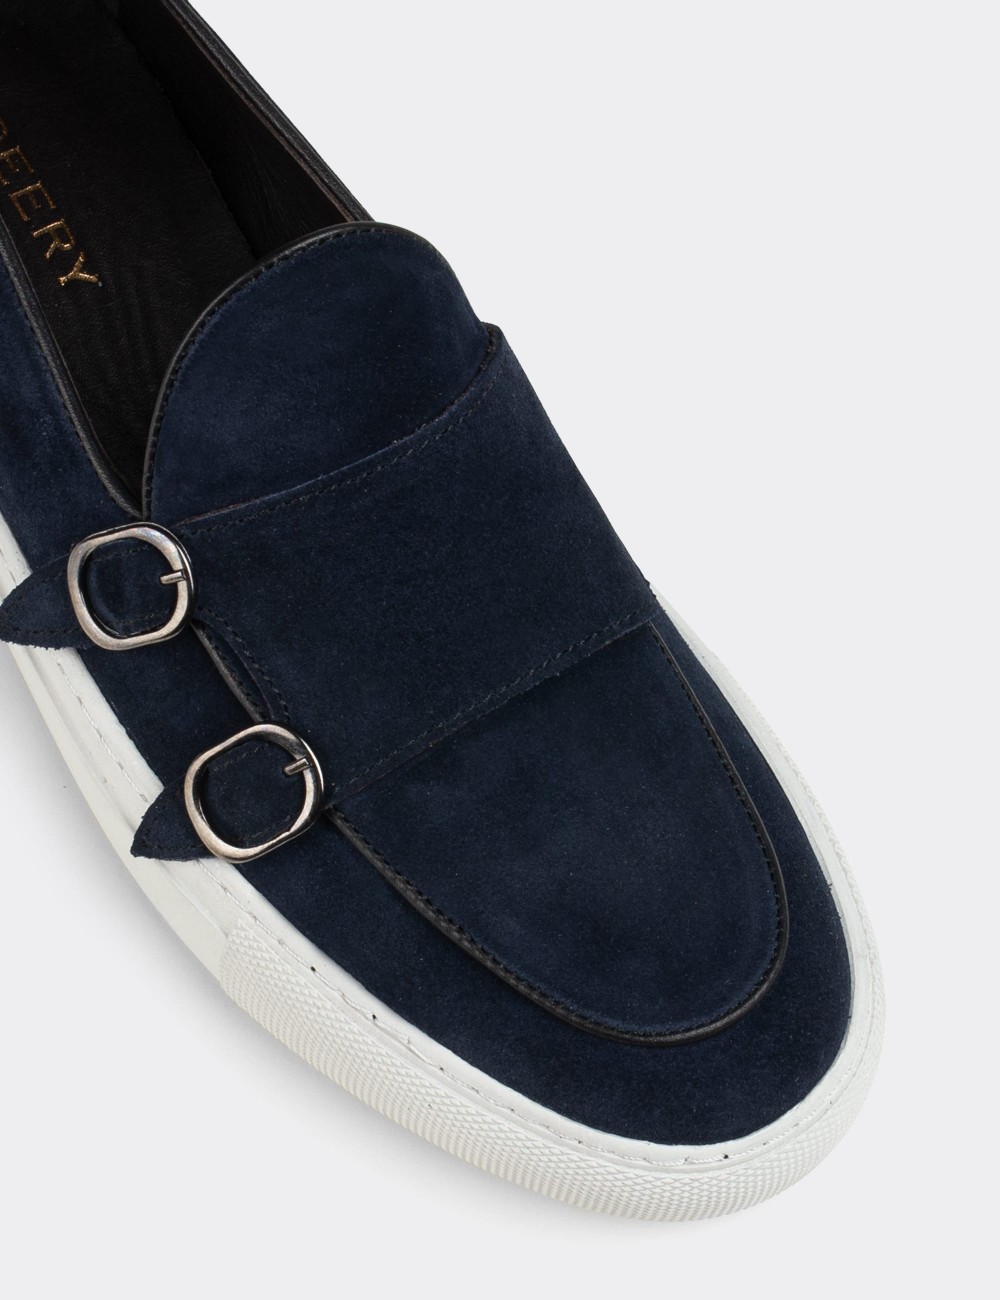 Navy Suede Leather Double Monk-Strap Sneakers - 01846MLCVC01